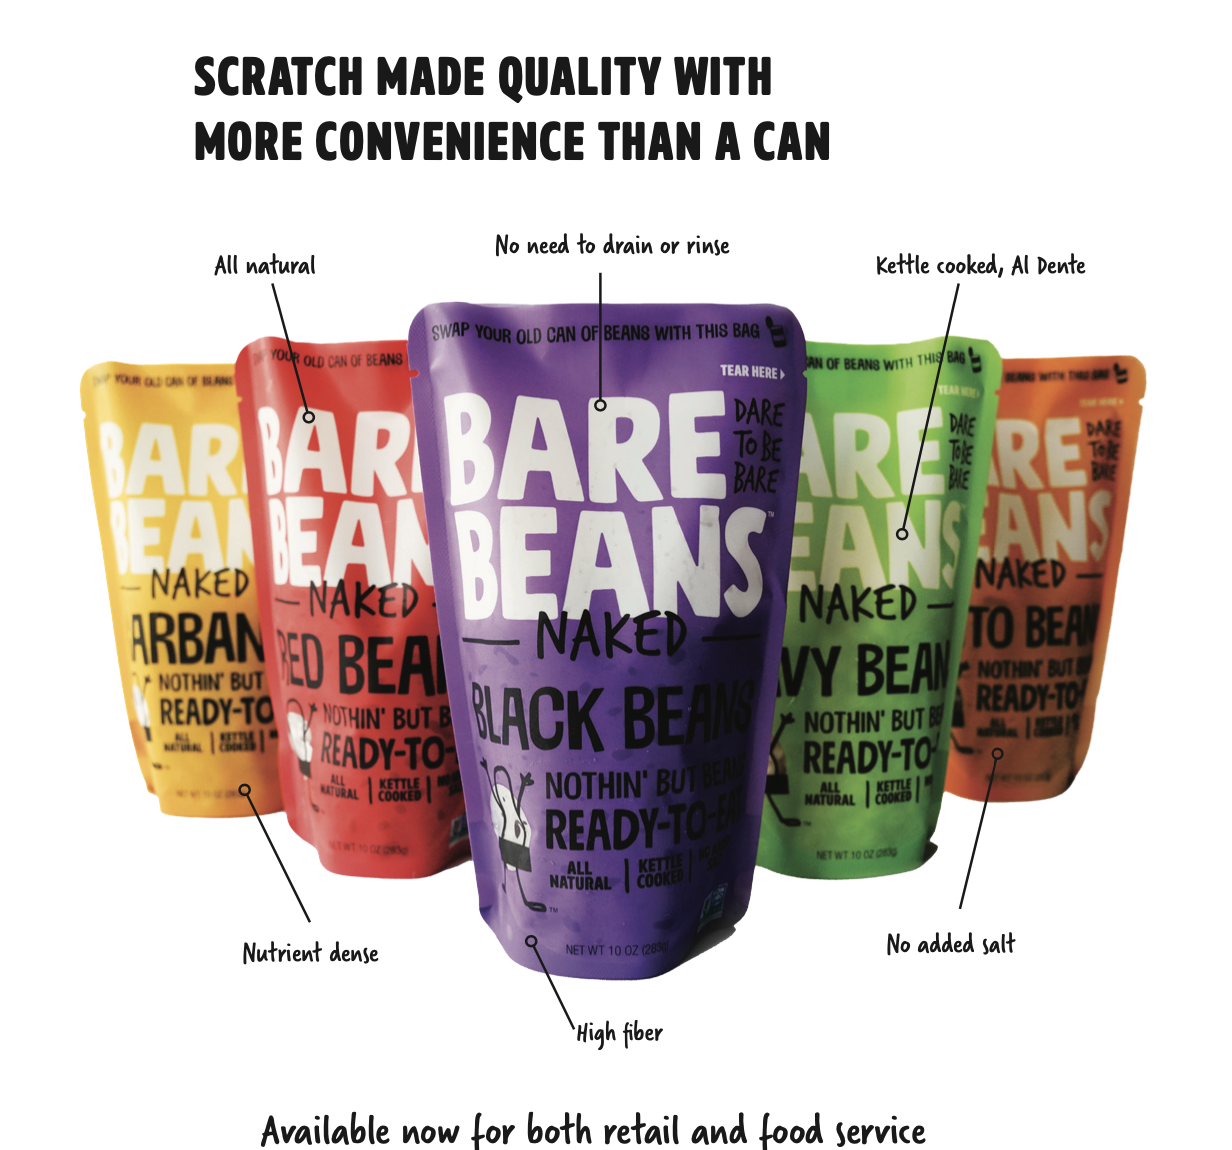 5 flavors of Bare Beans